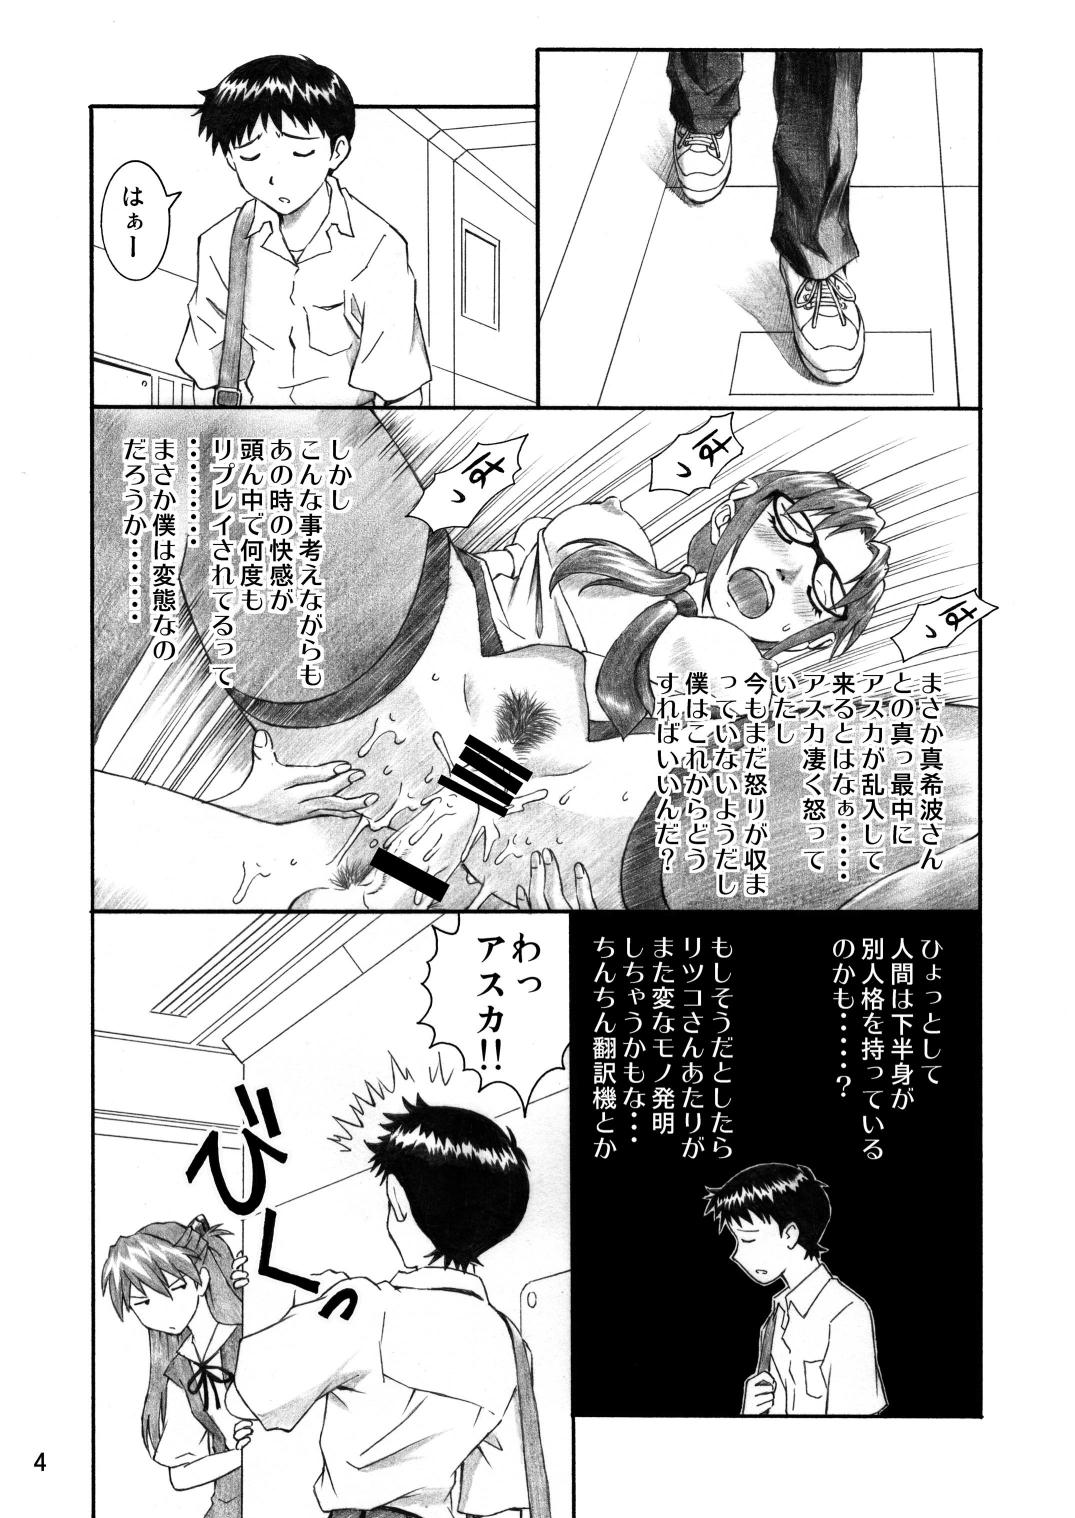 Tied INTERVIEW - Neon genesis evangelion Gay Outinpublic - Page 3